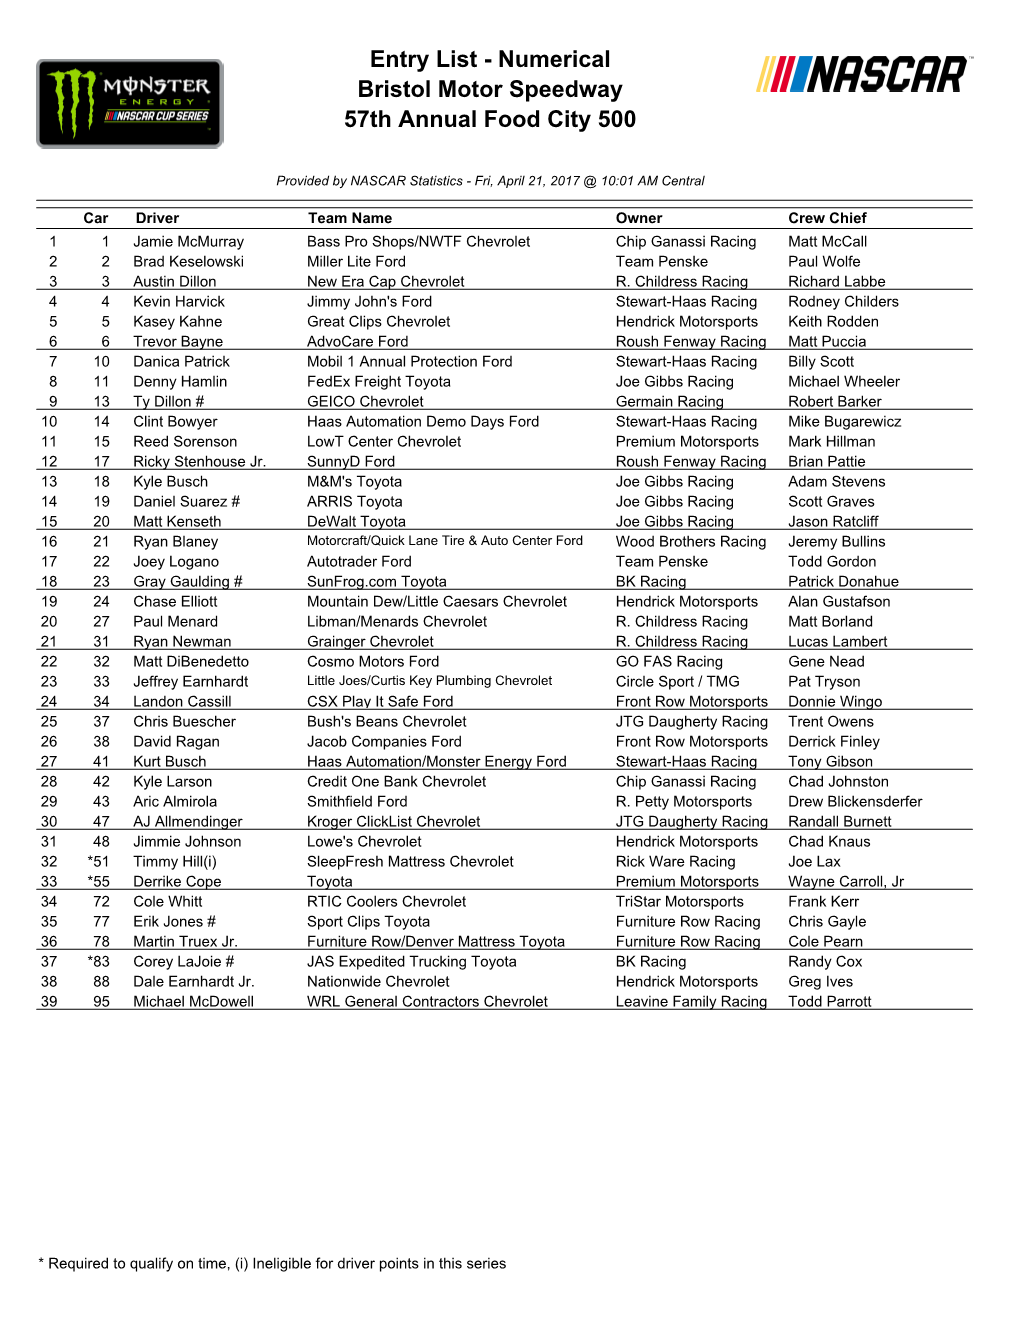 Entry List - Numerical Bristol Motor Speedway 57Th Annual Food City 500